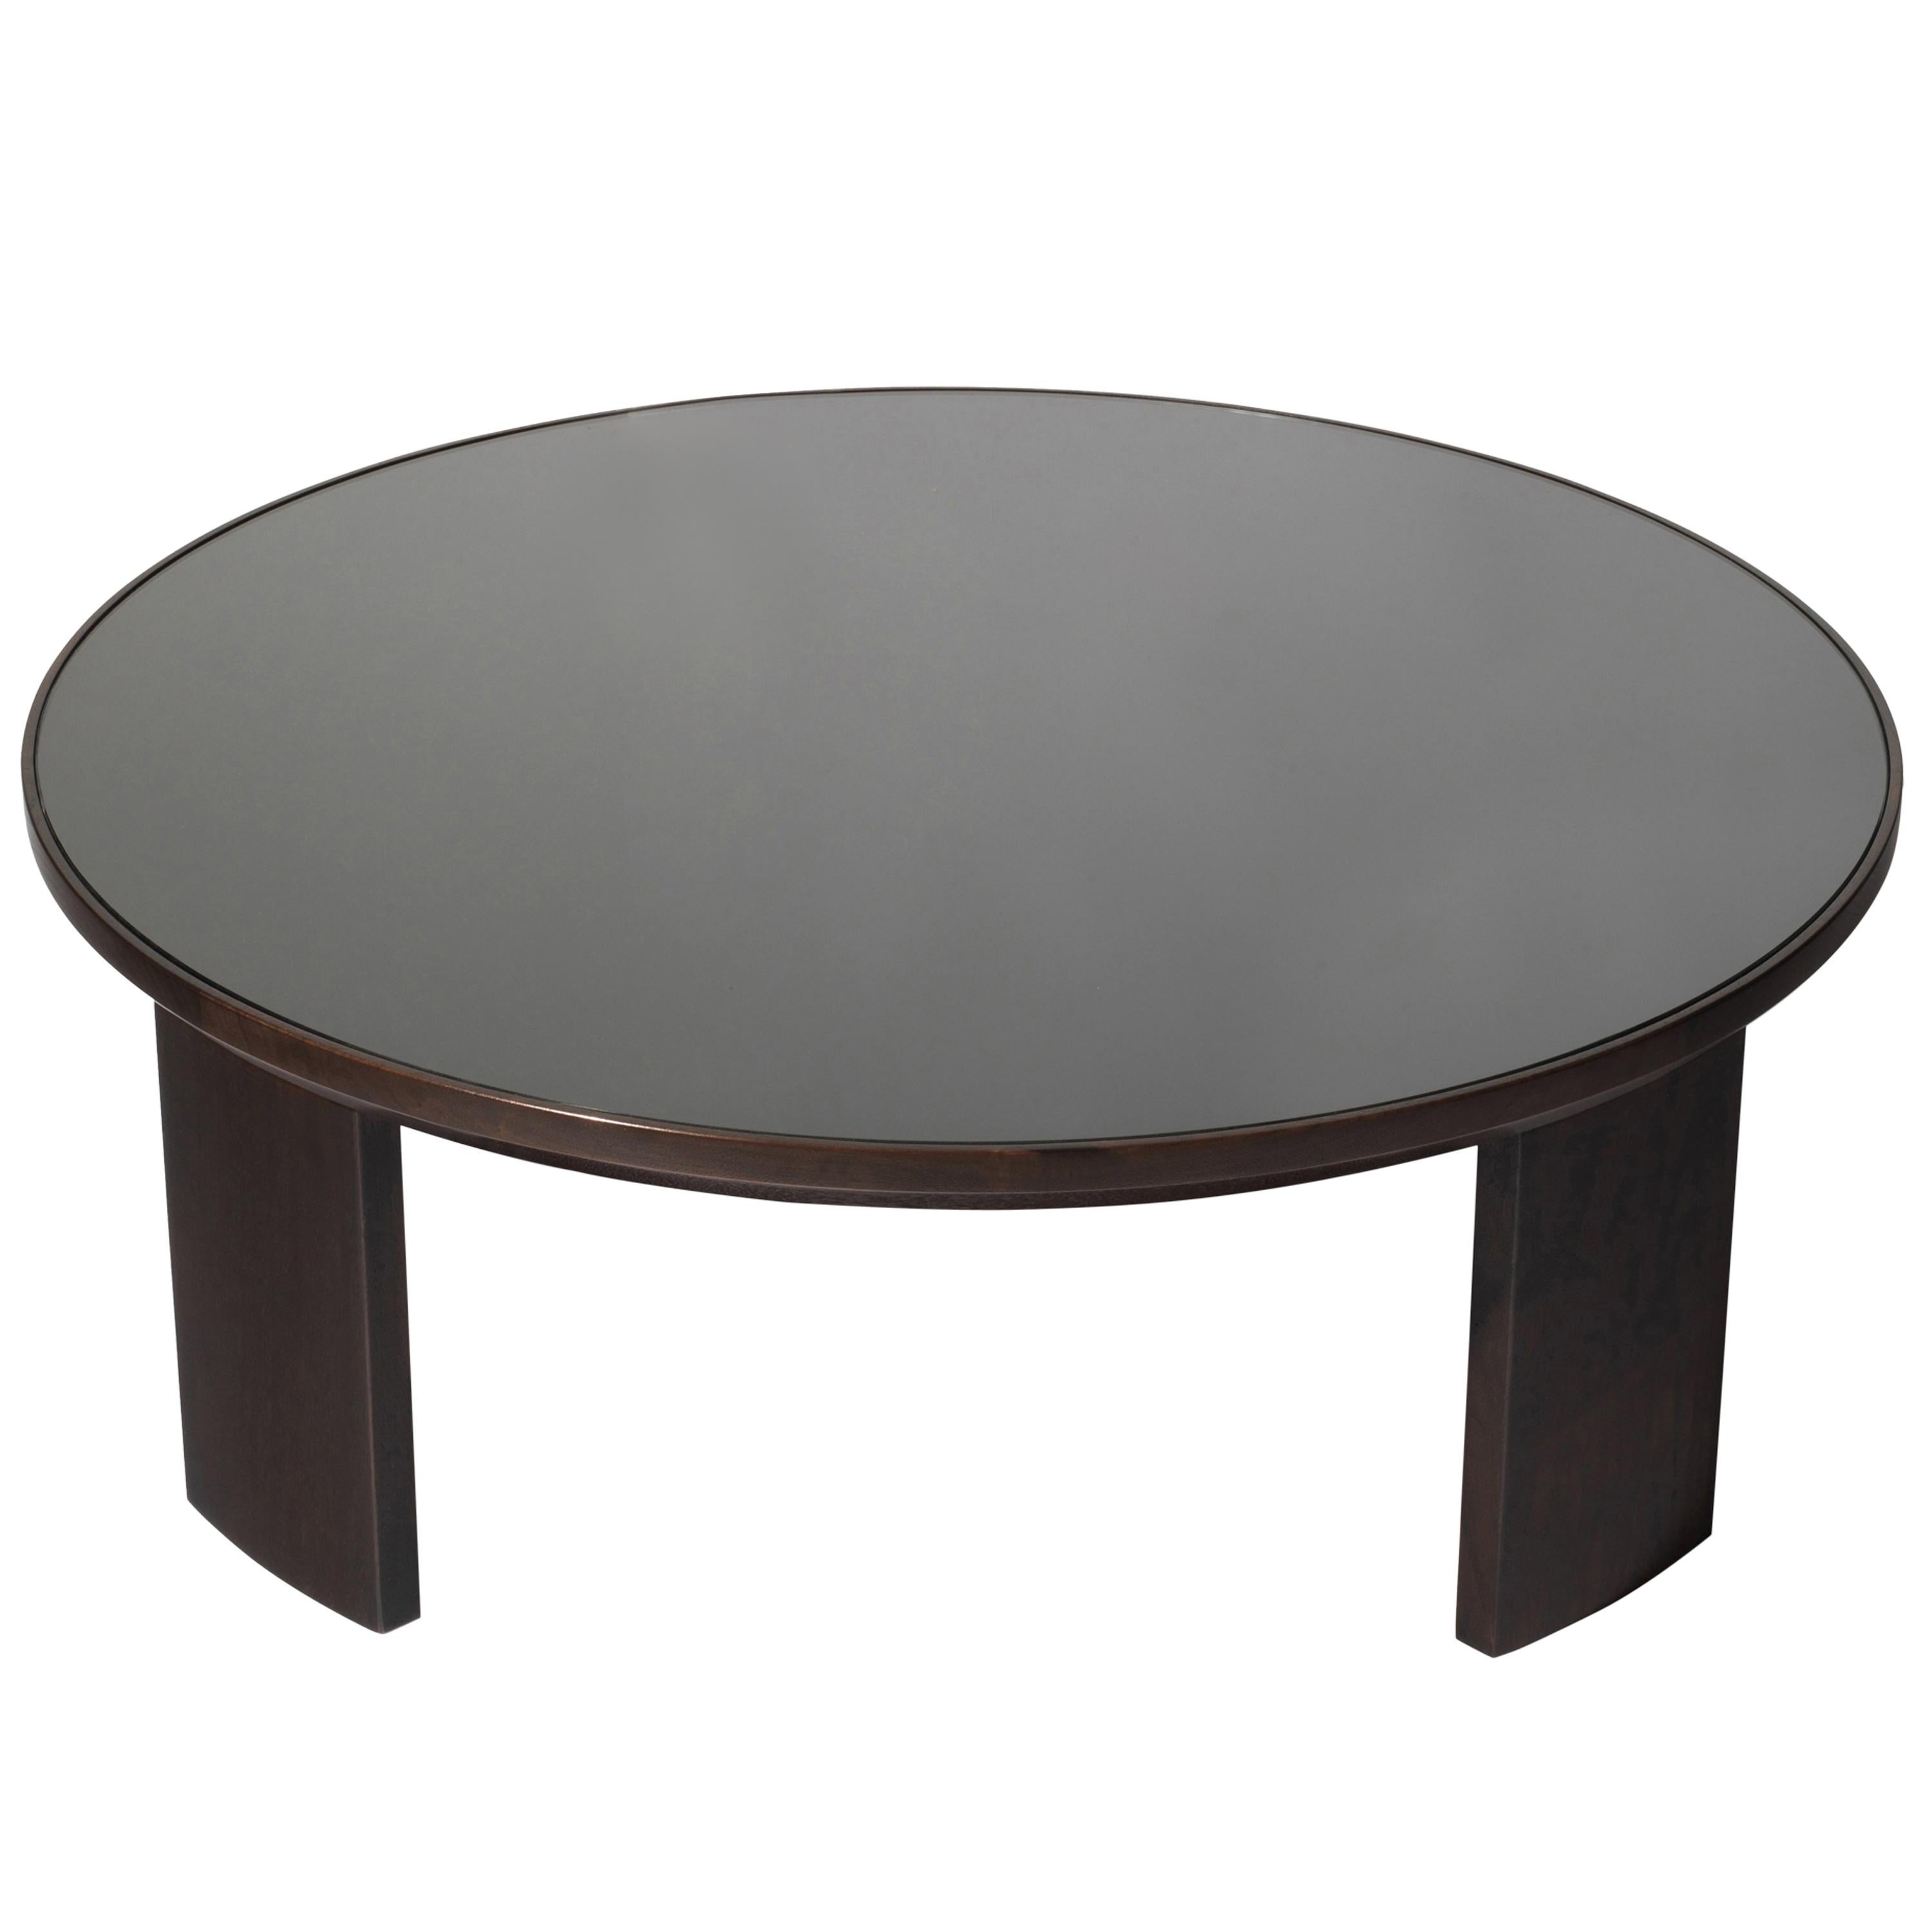 Contemporary Mirage Cocktail Table with Ebonized Walnut and Smoke Mirror Top